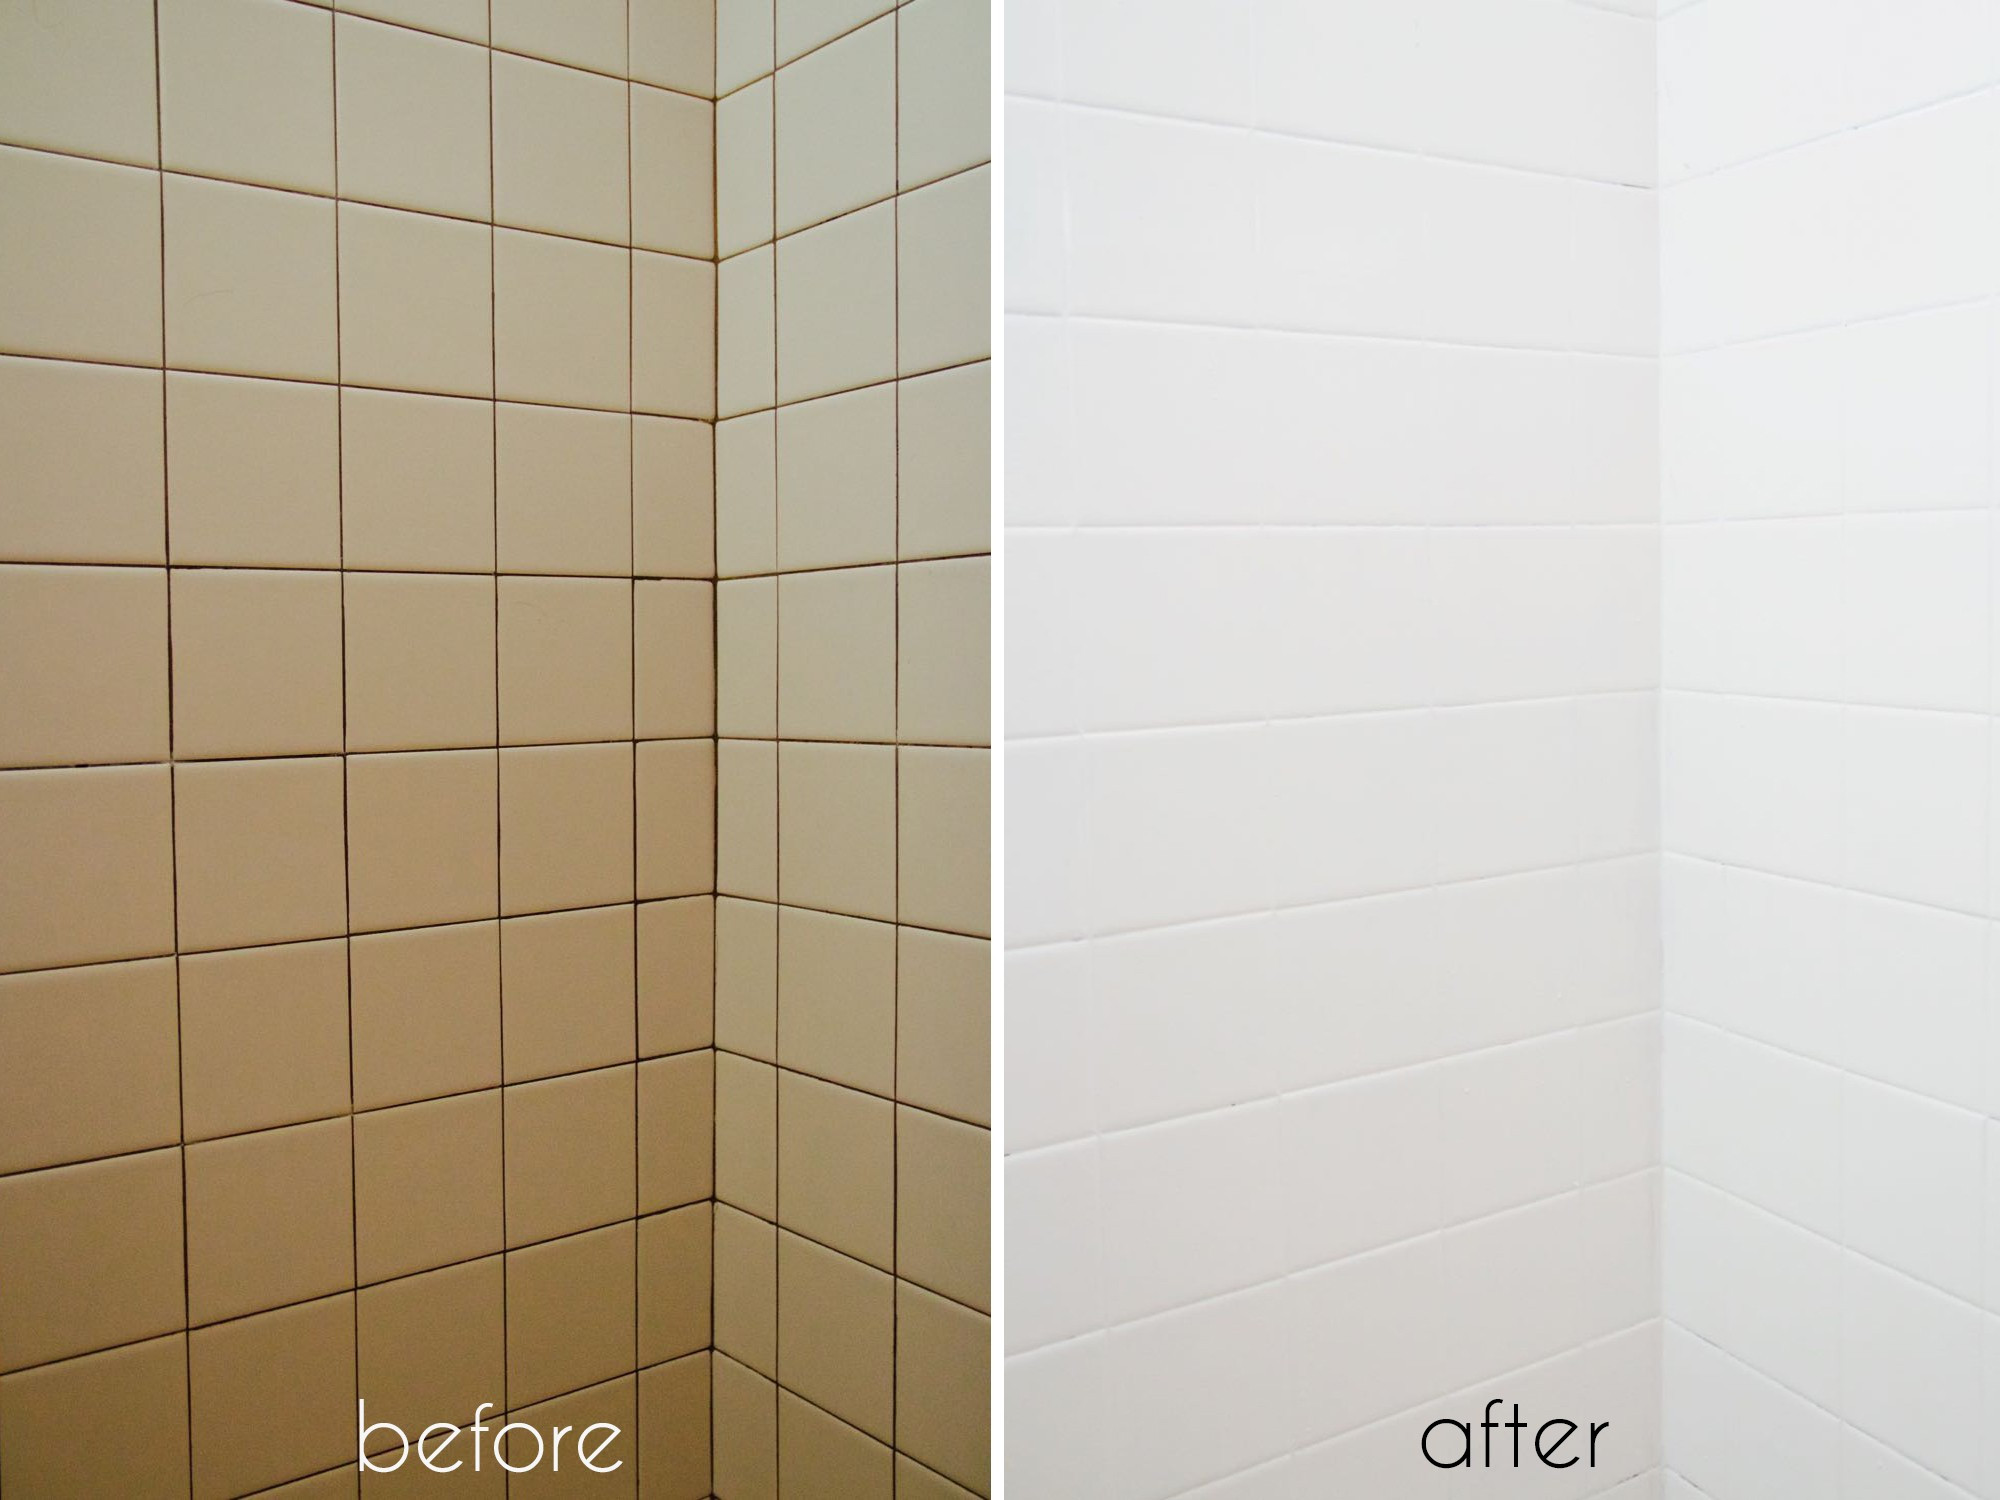 Painting Old Bathroom Tiles
 Elegant Painting Bathroom Tile before and after Layout